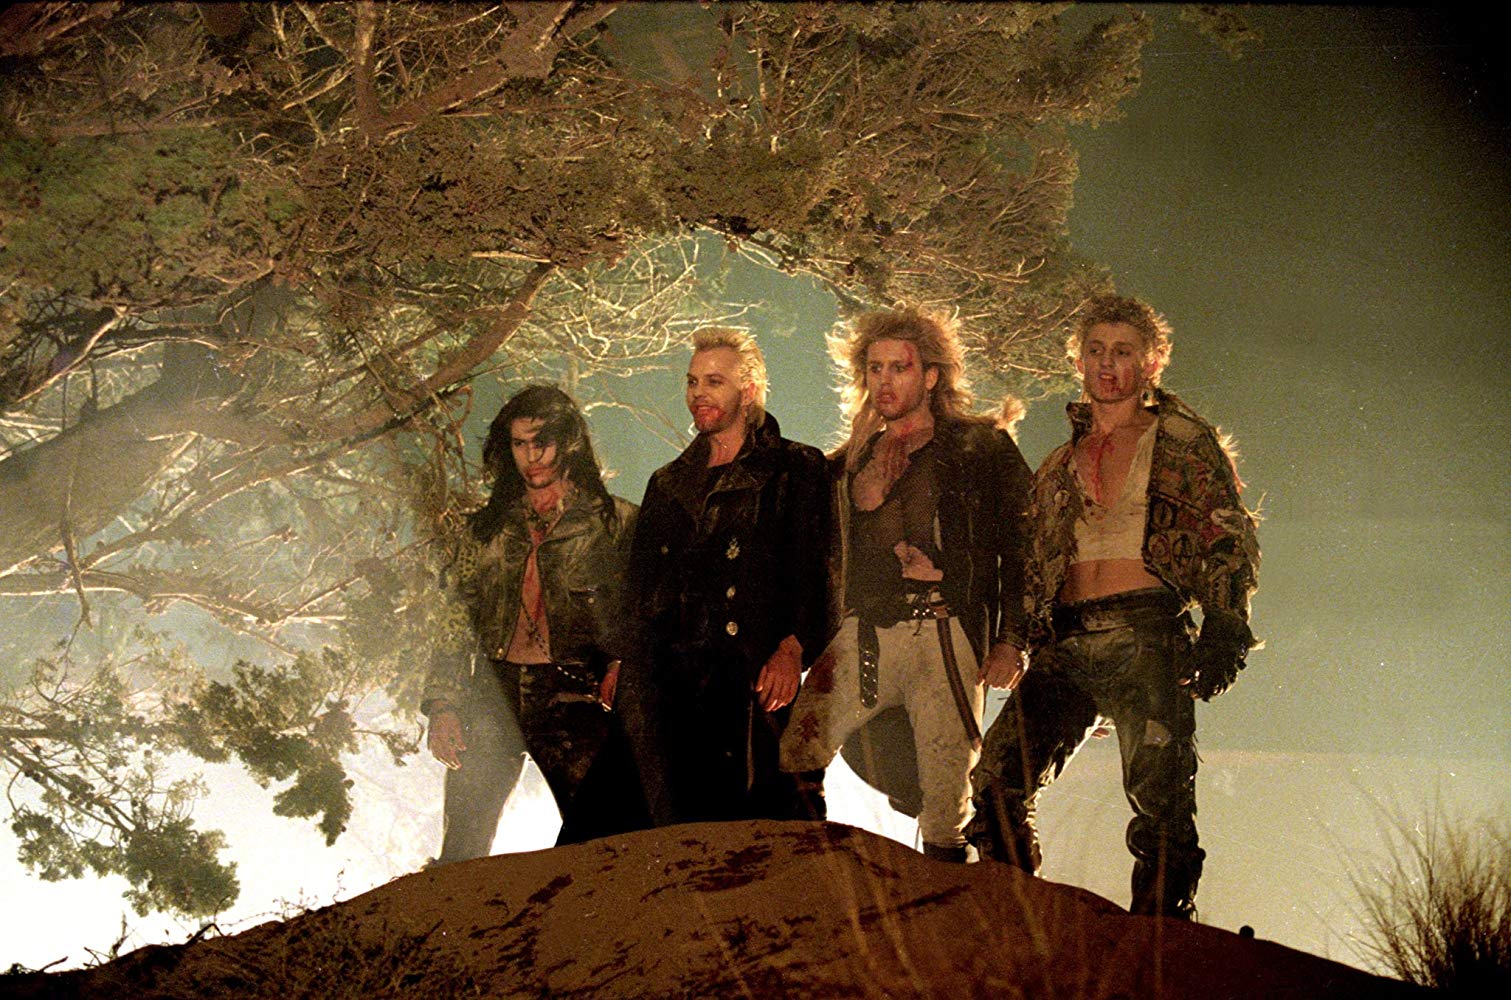 [News] Scripts Gone Wild Tackles THE LOST BOYS